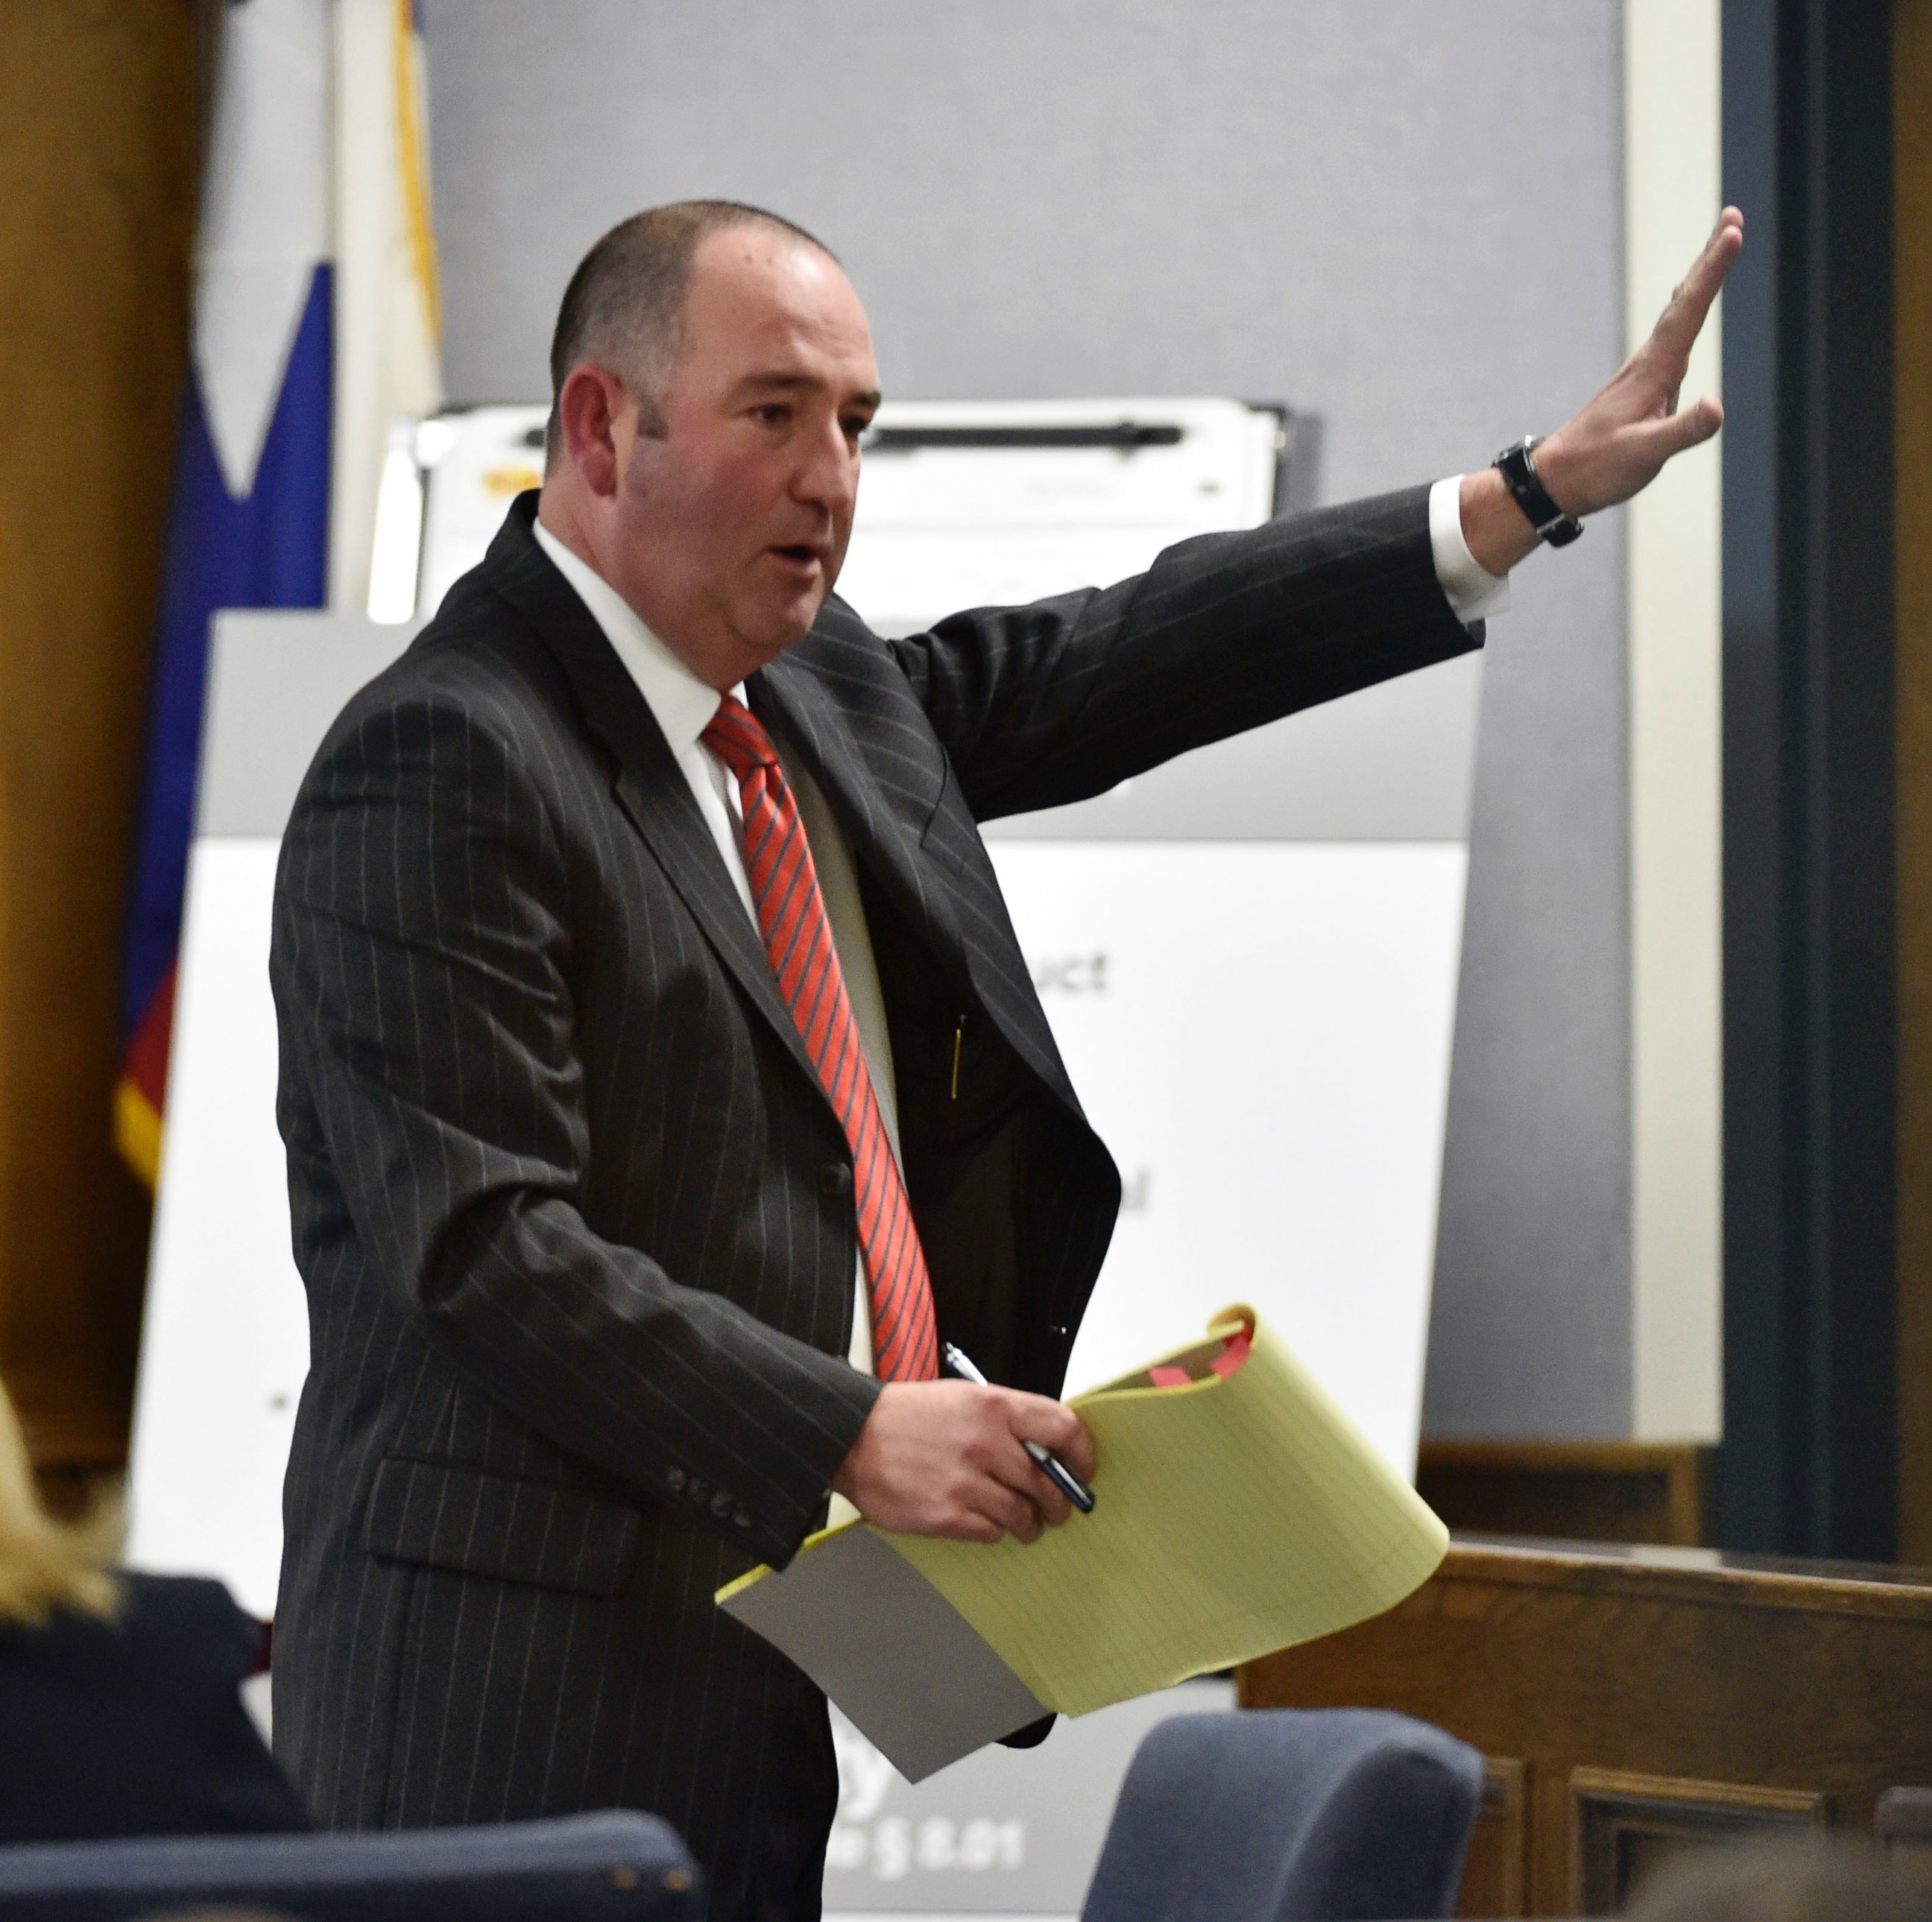 PHOTO: Defense attorney R. Shay Isham speaks to the jury during closing arguments in the capital murder trial of former Marine Cpl. Eddie Ray Routh in Stephenville, Texas on Feb. 24, 2015.